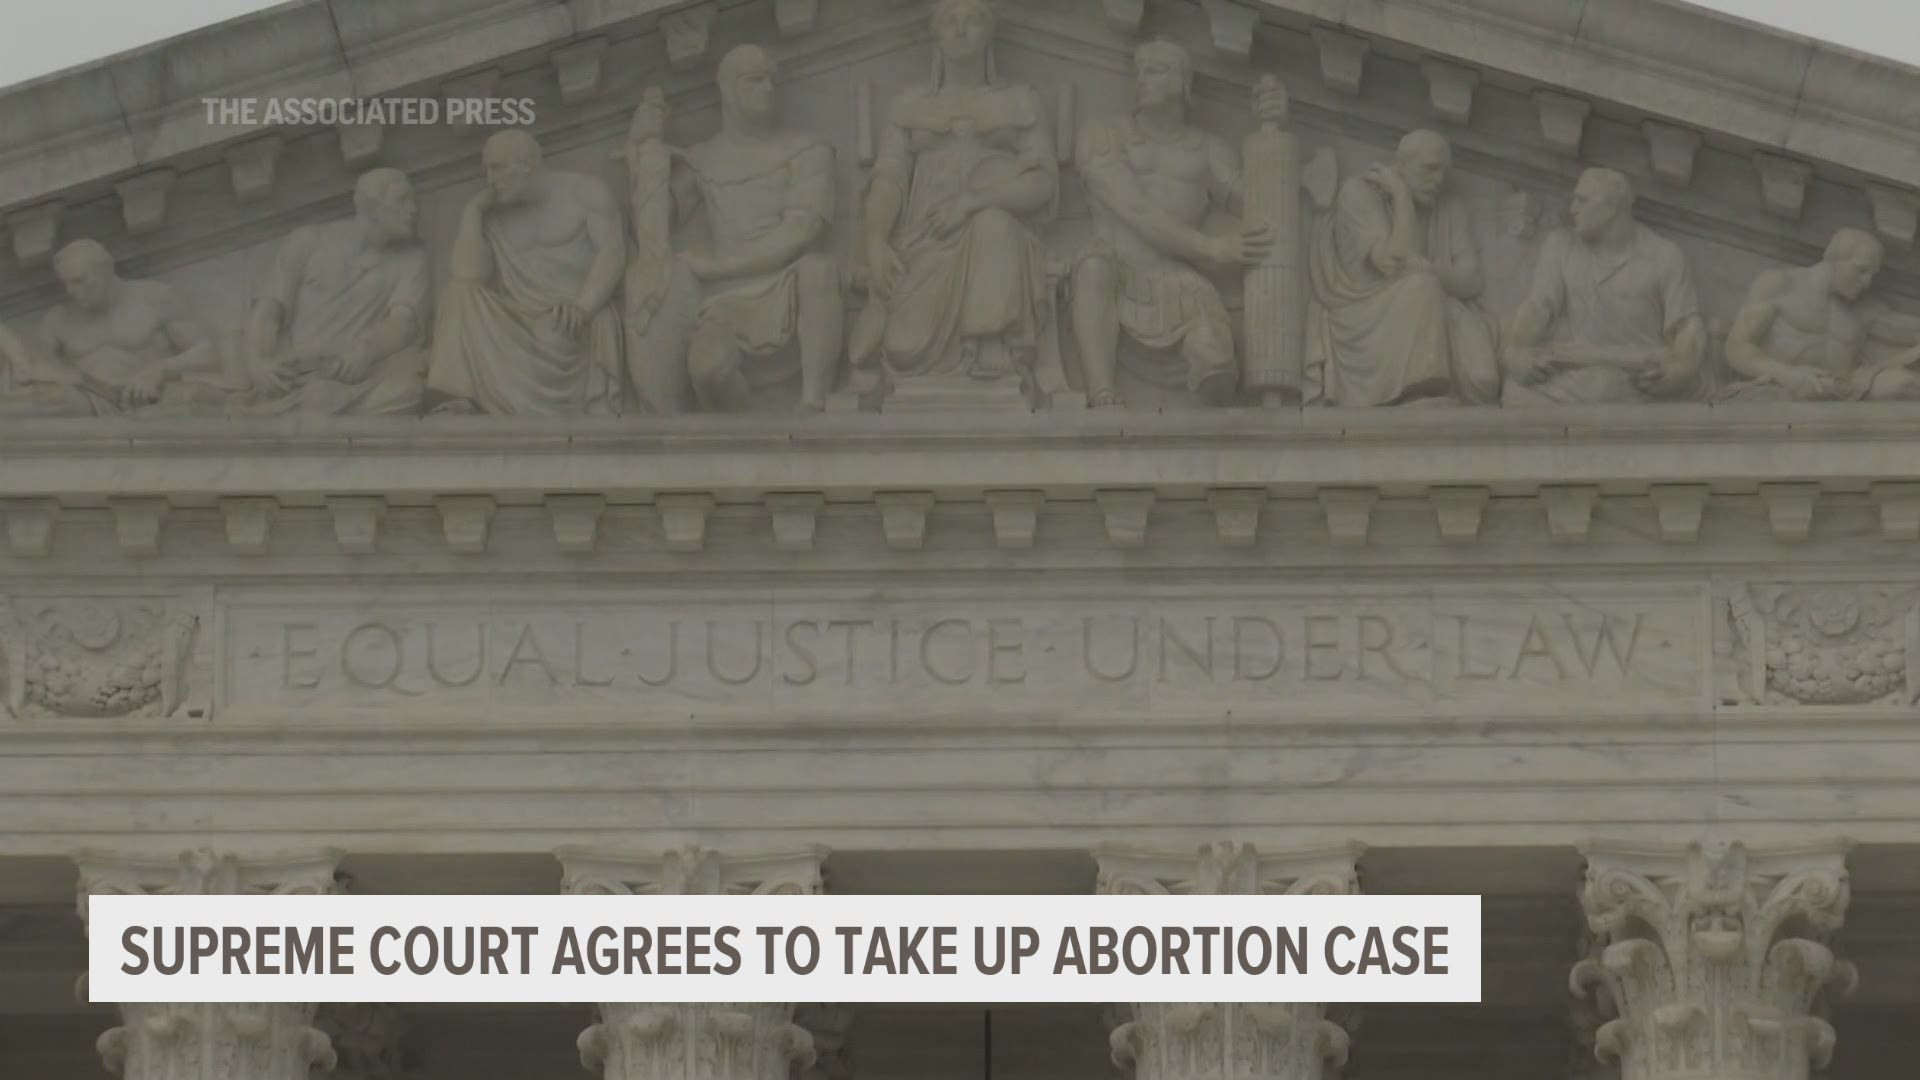 The Supreme Court will take up the case of Mississippi’s bid to enforce a 15-week ban on abortion.